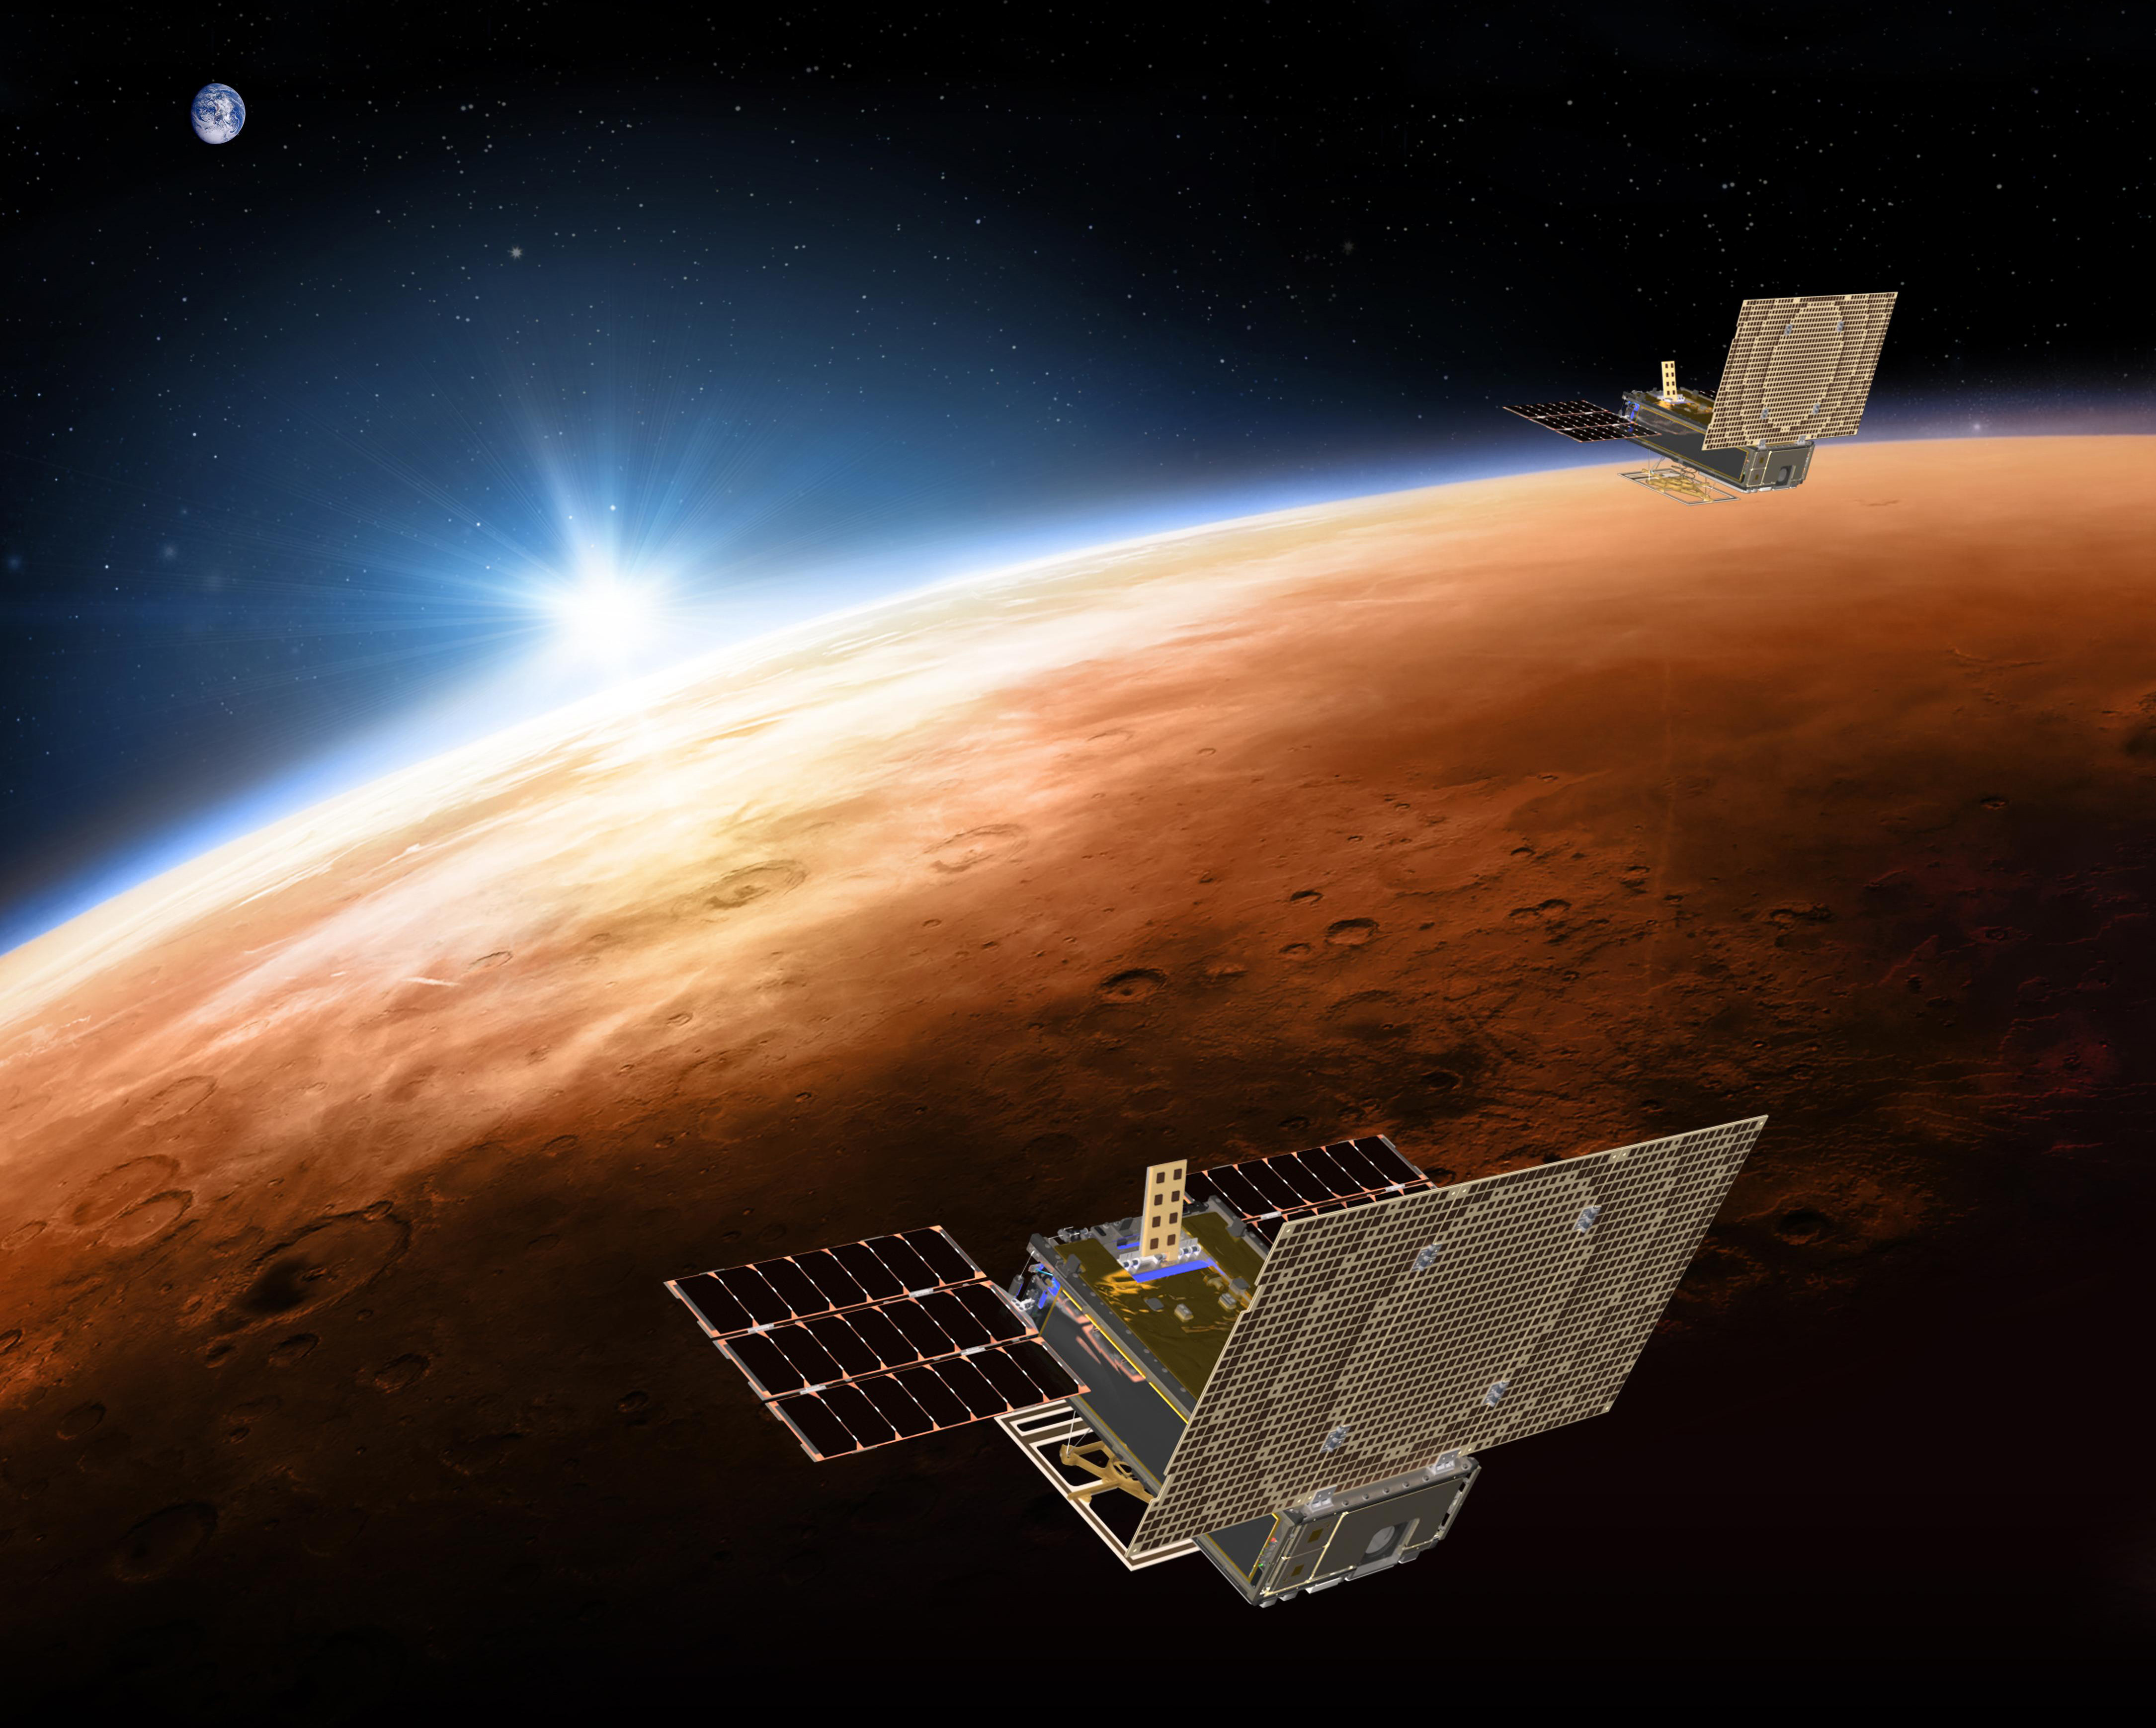 This illustration made available by NASA on March 29, 2018 shows the twin Mars Cube One (MarCO) spacecraft flying over Mars with Earth and the sun in the distance. The MarCOs will be the first CubeSats - a kind of modular, mini-satellite - flown into deep space. They're designed to fly along behind NASA's InSight lander on its cruise to Mars. (NASA/JPL-Caltech via AP)